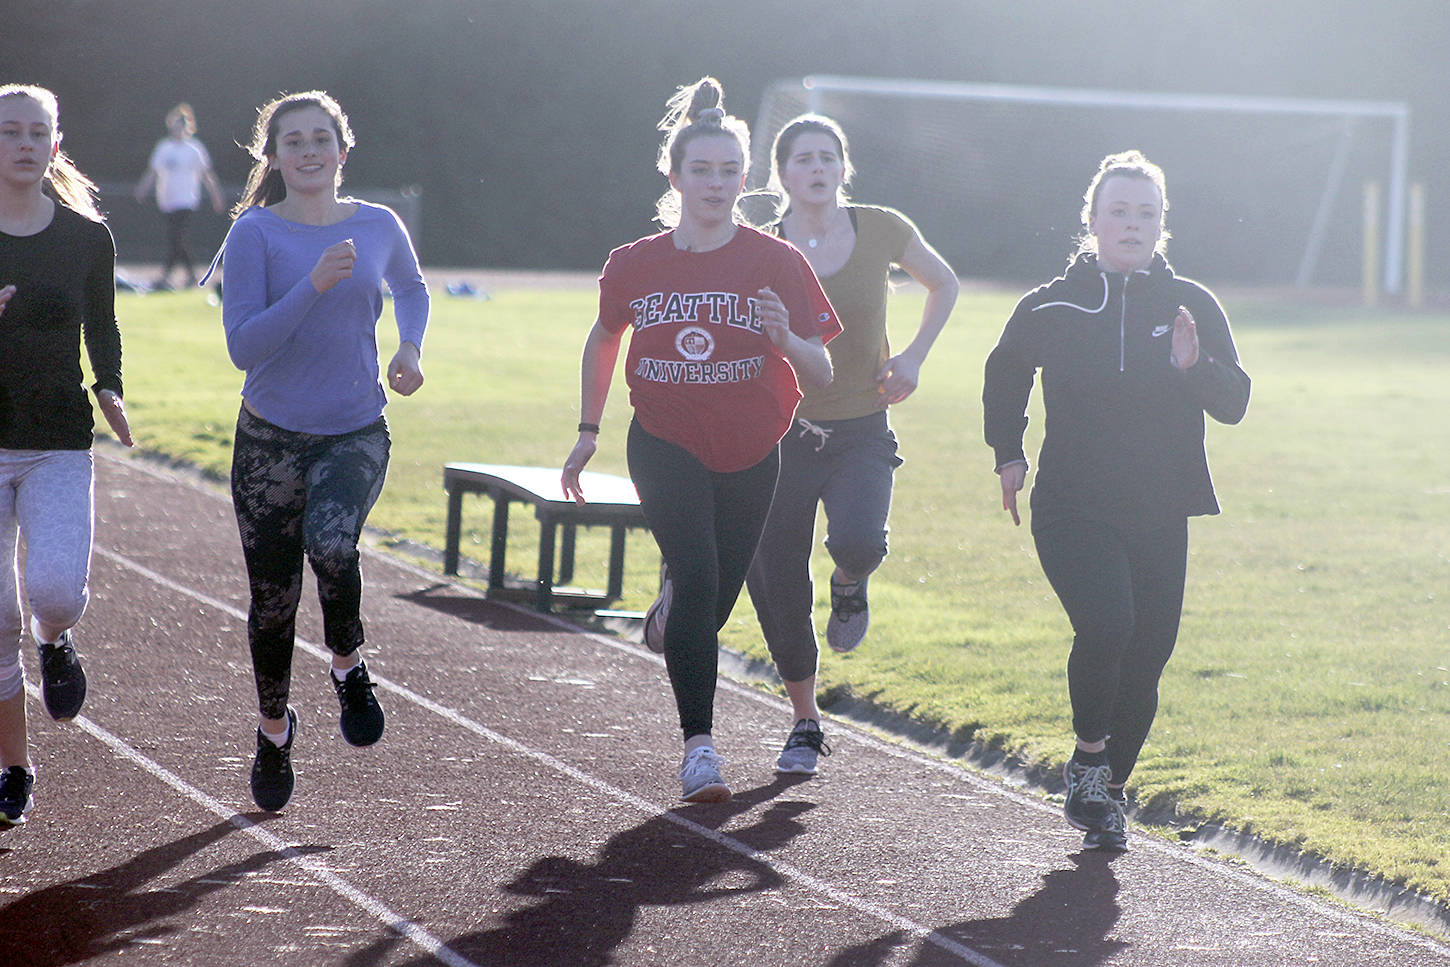 Evan Thomspon / The Record                                South Whidbey track and field athletes practice sprinting on Thursday afternoon. From left to right: Serena McLain, Leanne Robbins, Sophia Nielsen, Grace Complita and Mikayla Hezel.